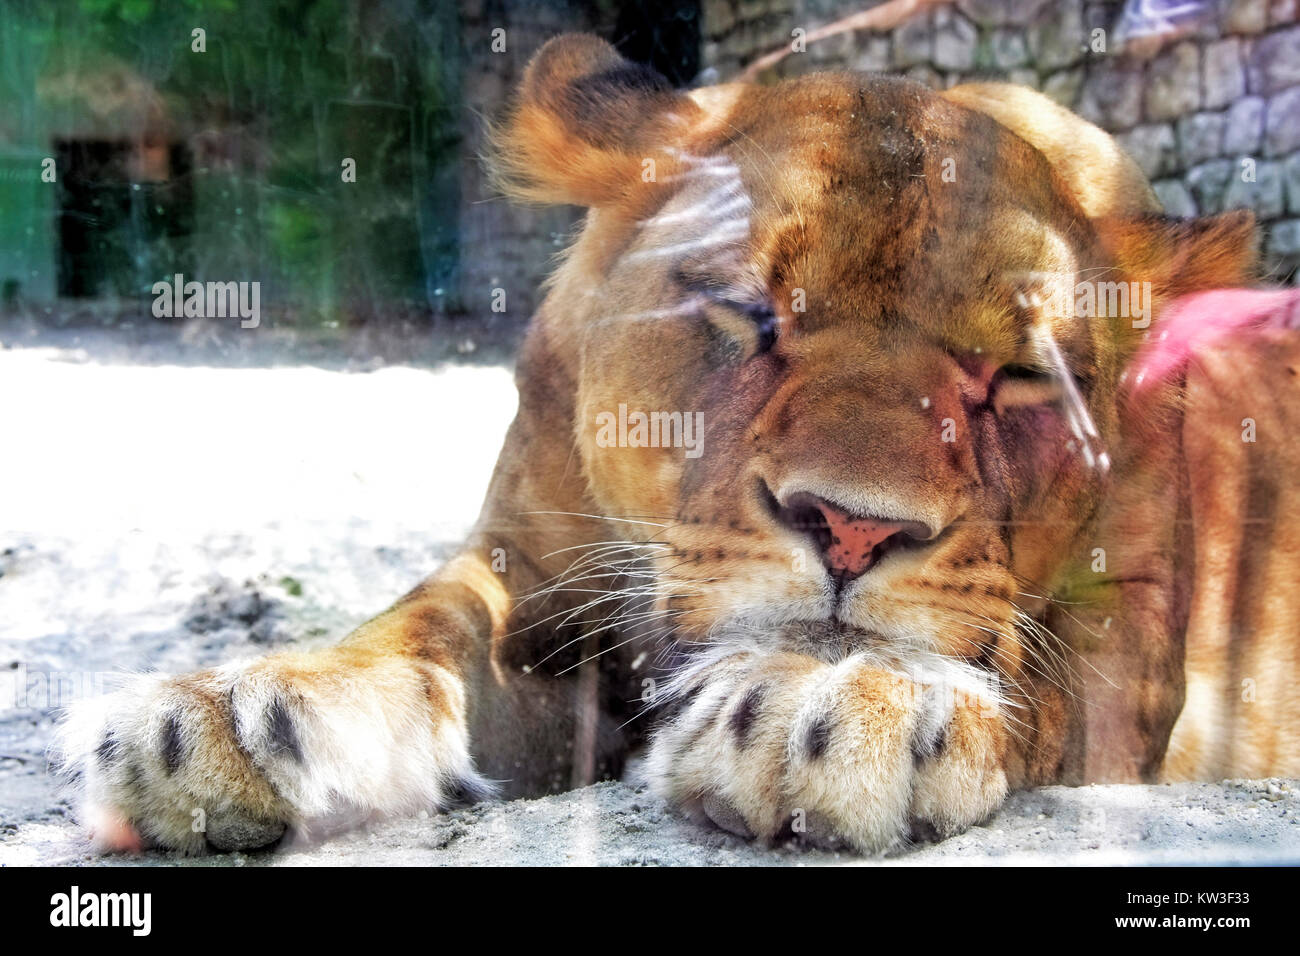 Sleeping lioness through the glass in the zoo Stock Photo